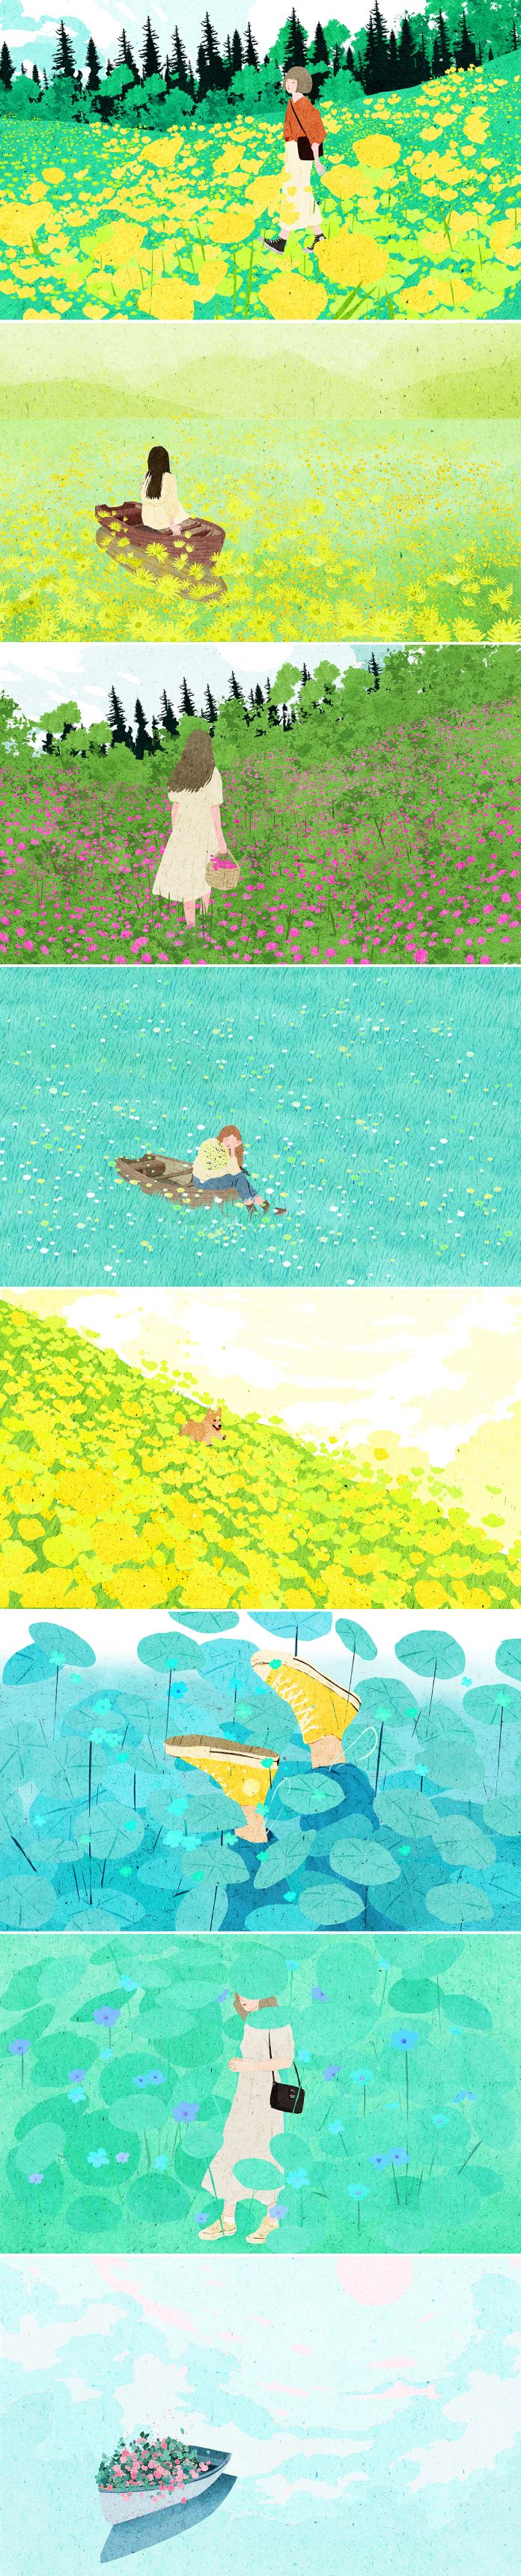 Spring and Flowers by Xuan Loc Xuan